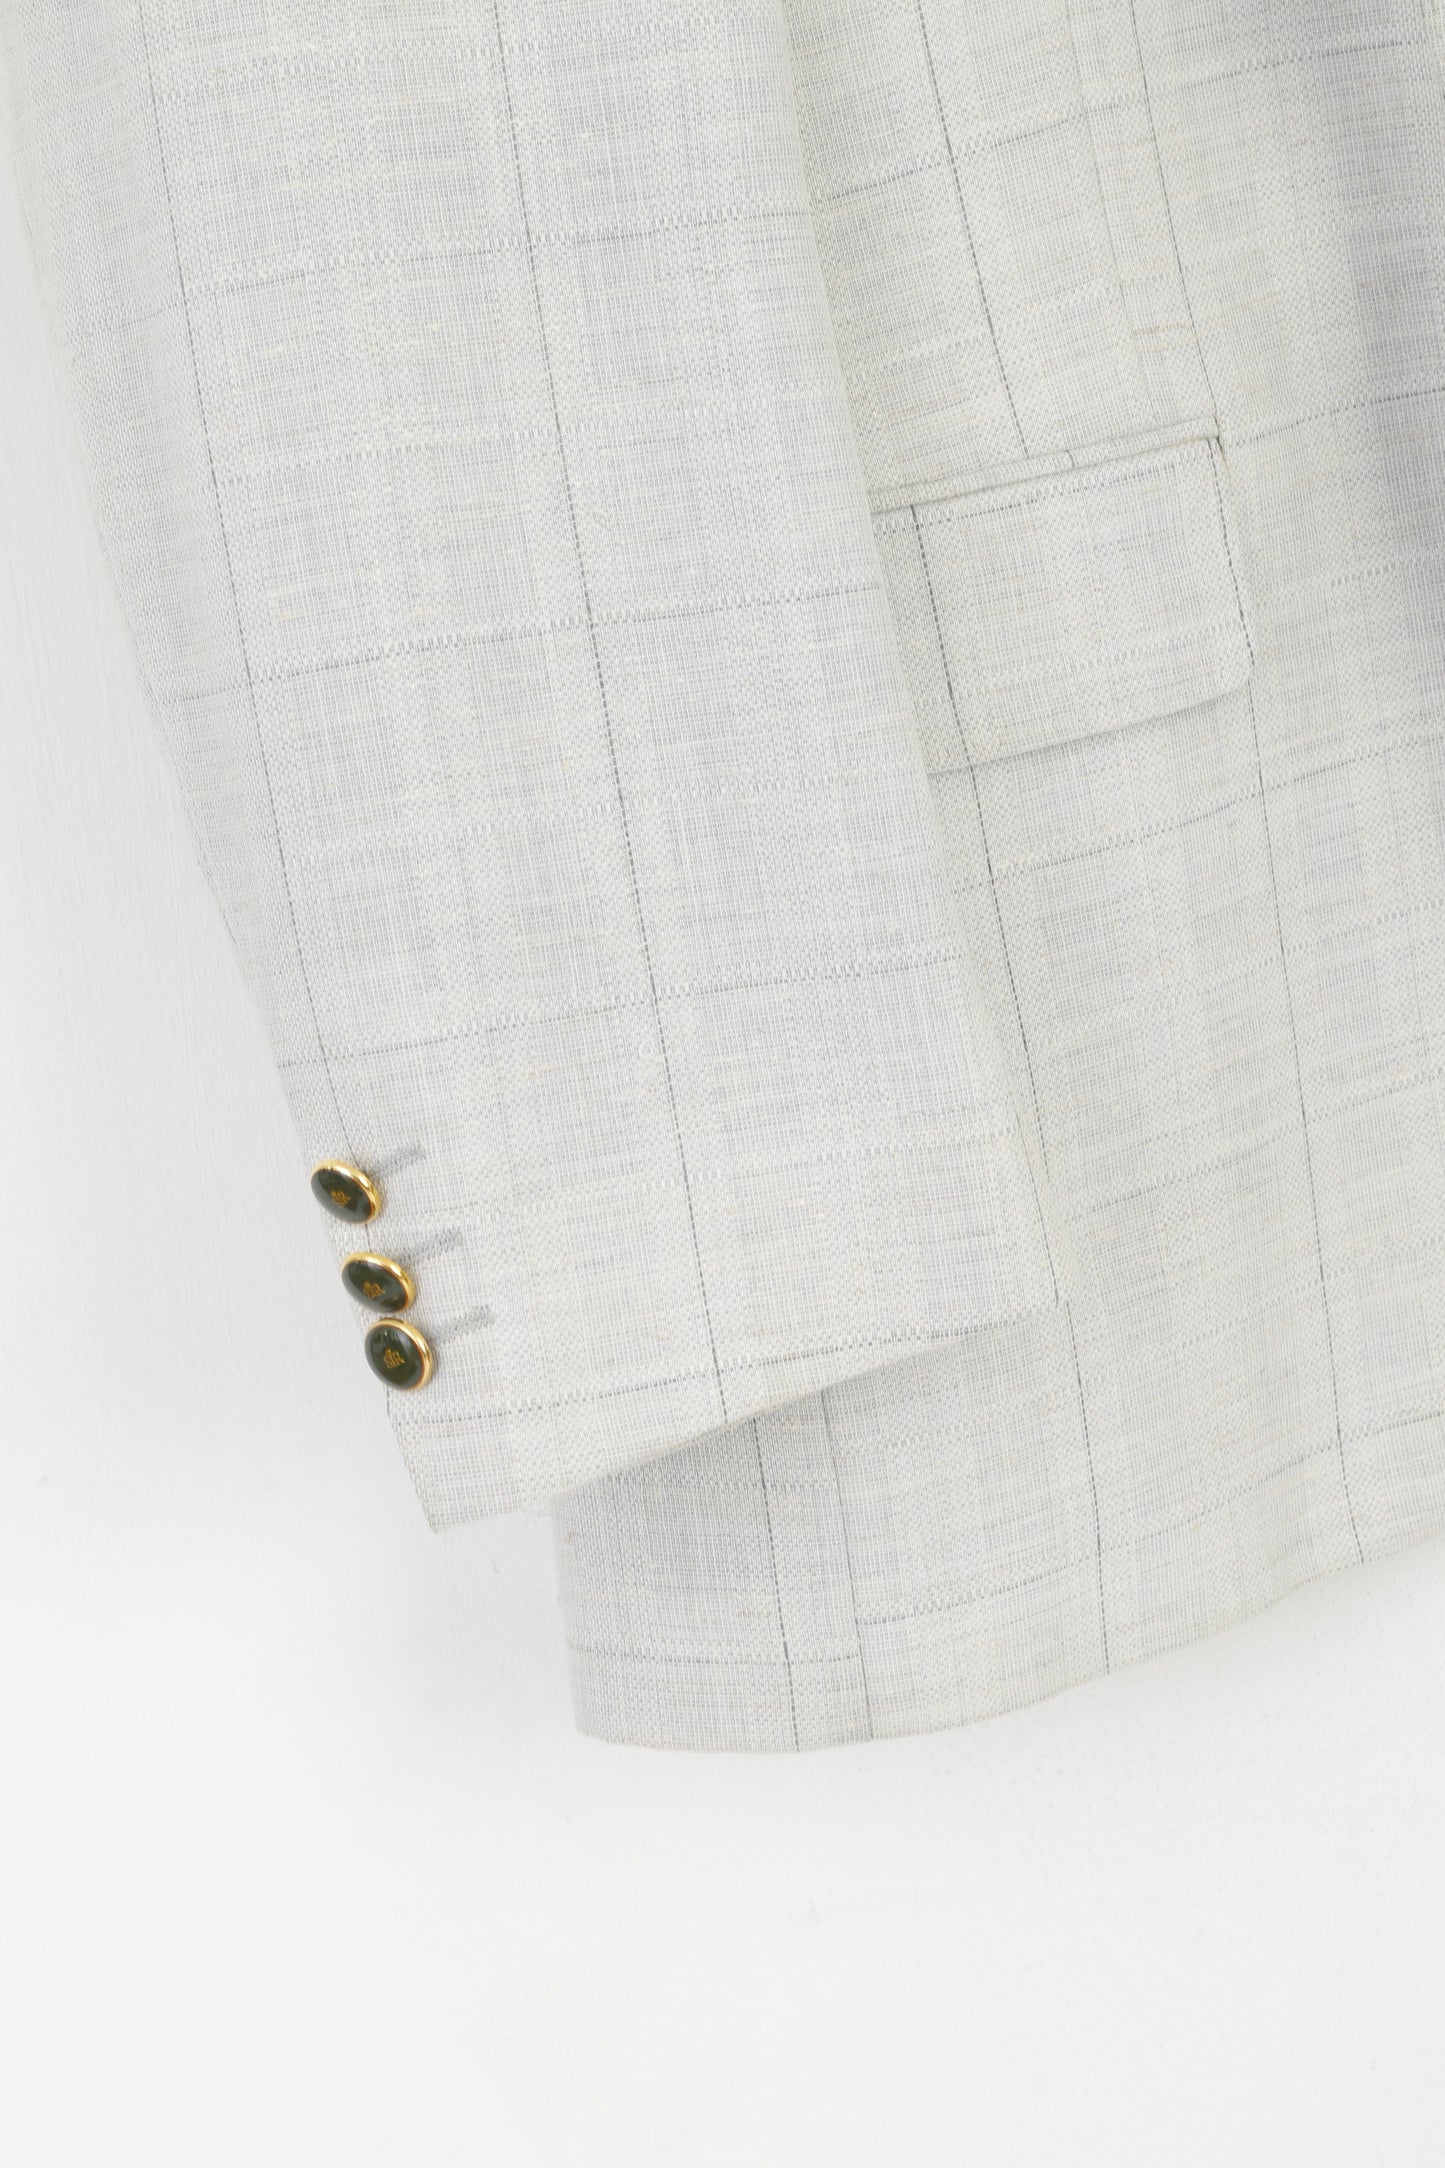 SIR di Lucci Men 55 42 Blazer Grey Check Wool Linen Detailed Single Breasted Jacket